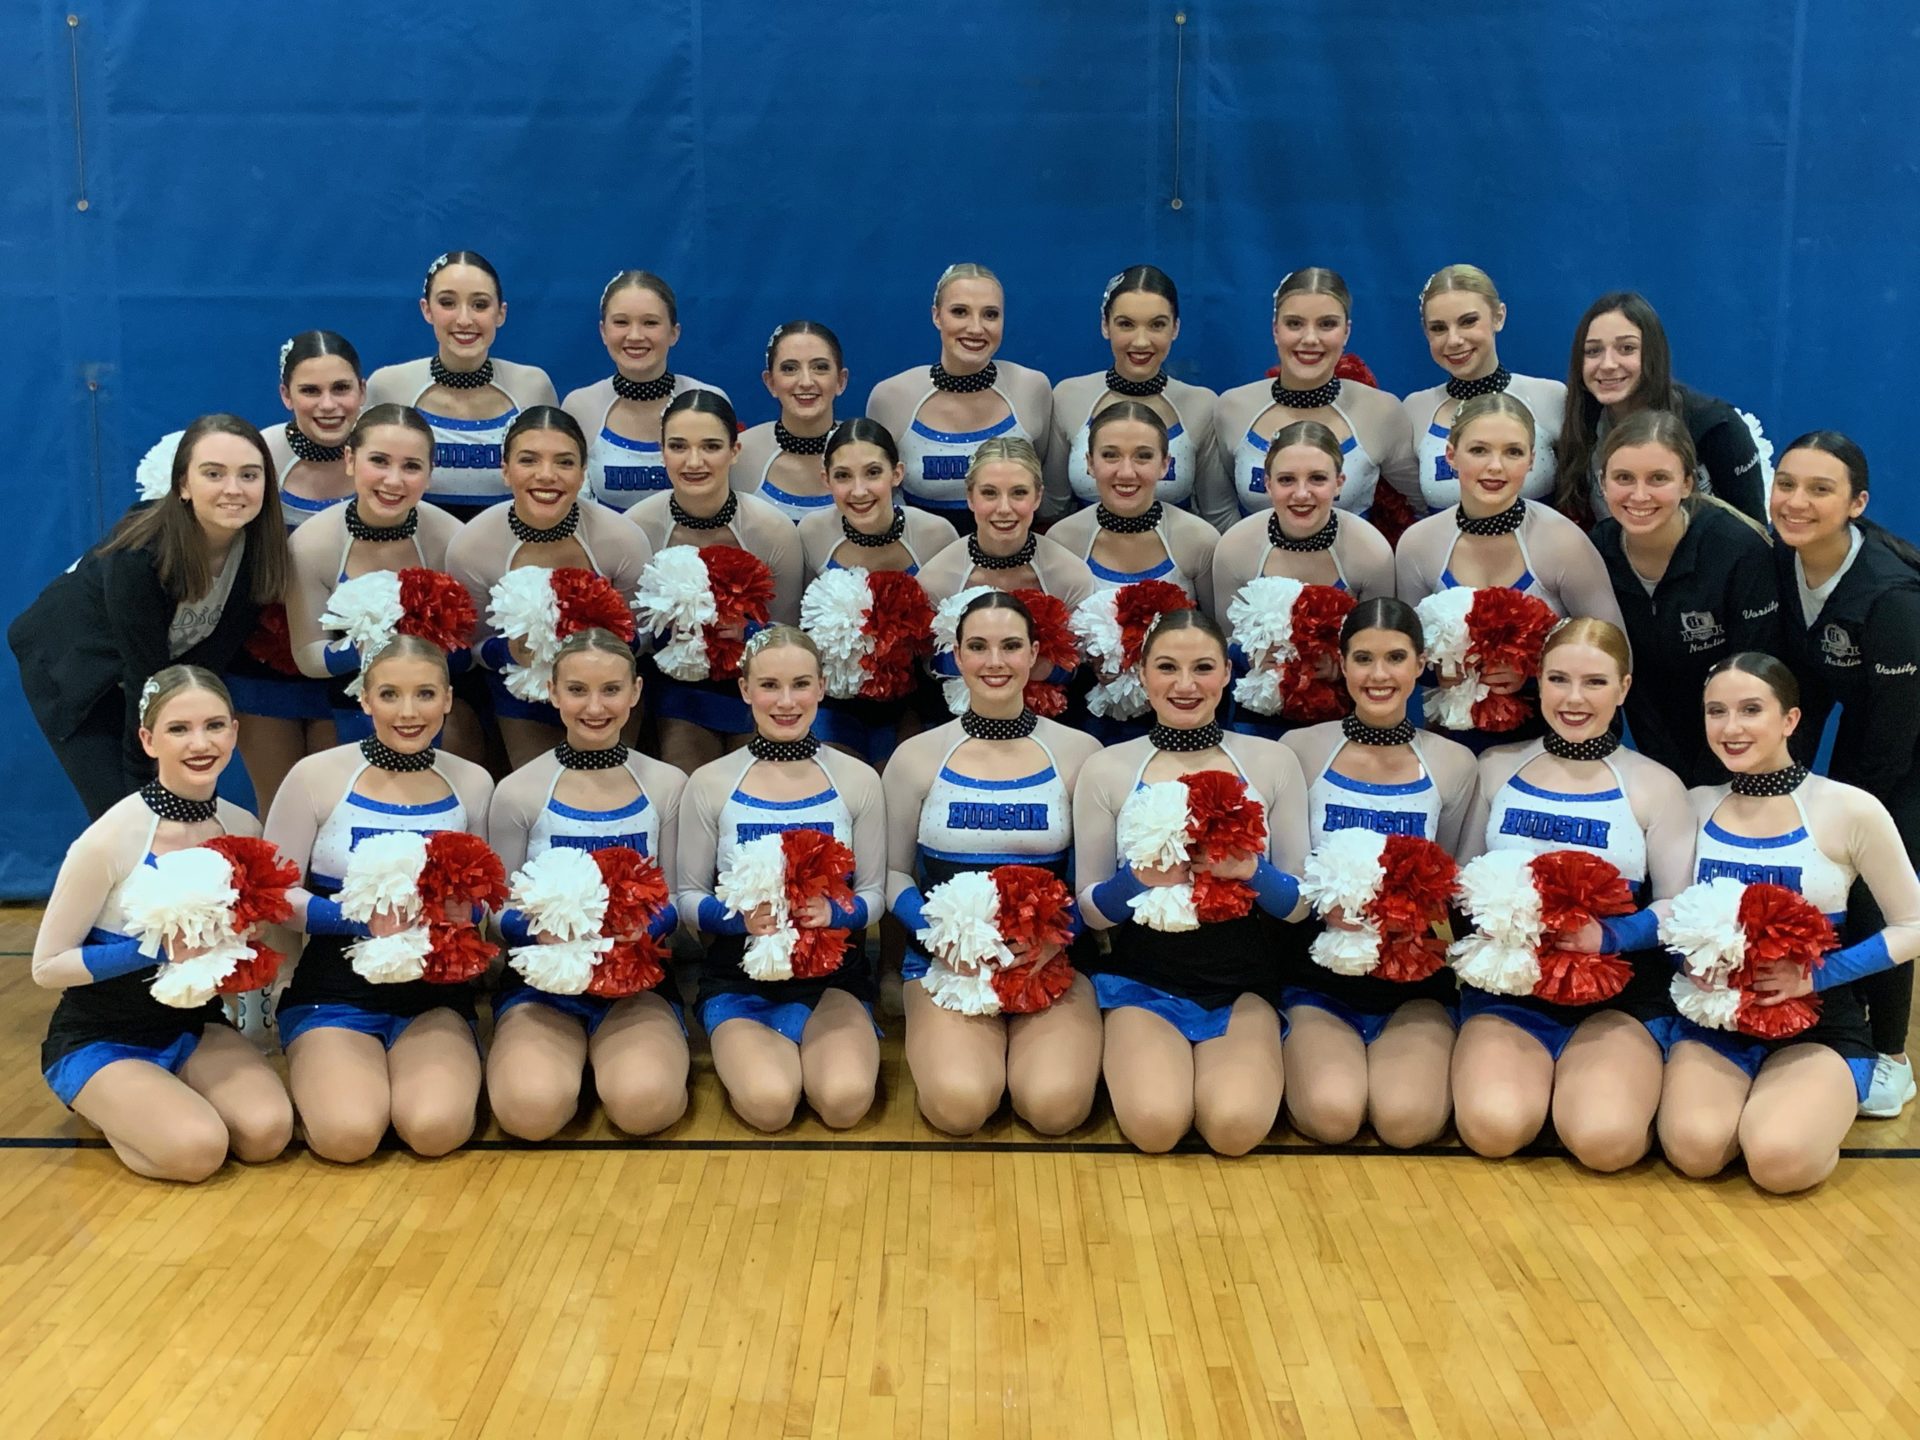 Team posing in red white and blue